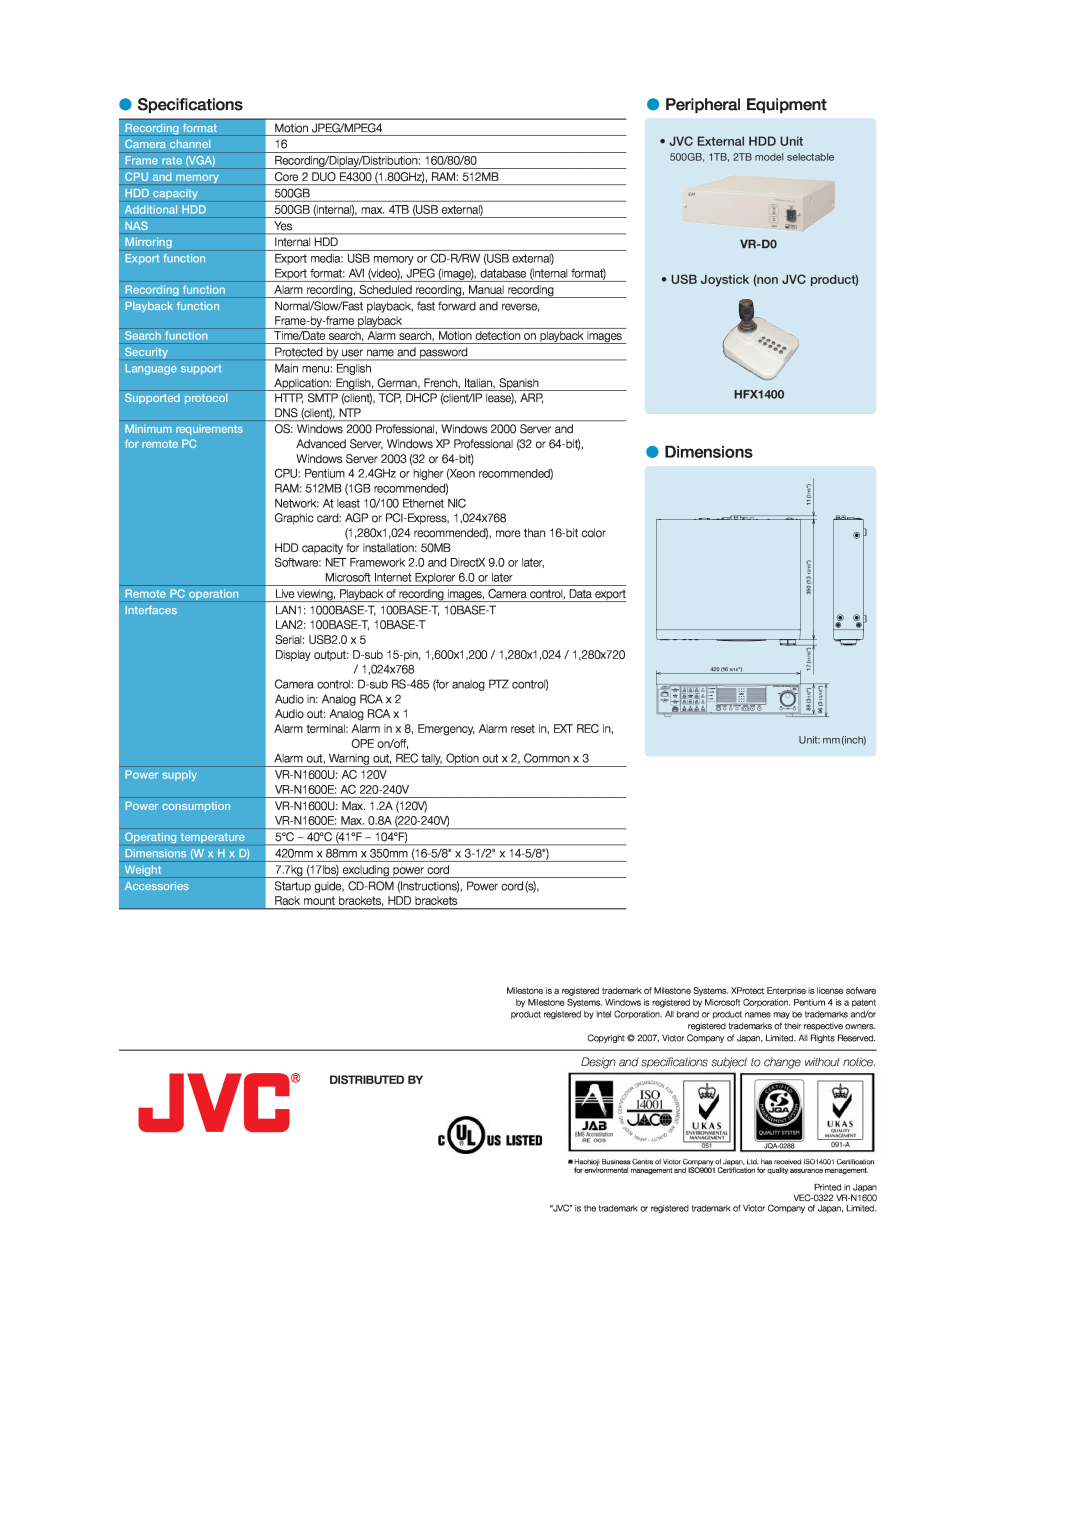 JVC VR-N1600 manual Specifications, Peripheral Equipment, Dimensions, VR-D0, HFX1400 